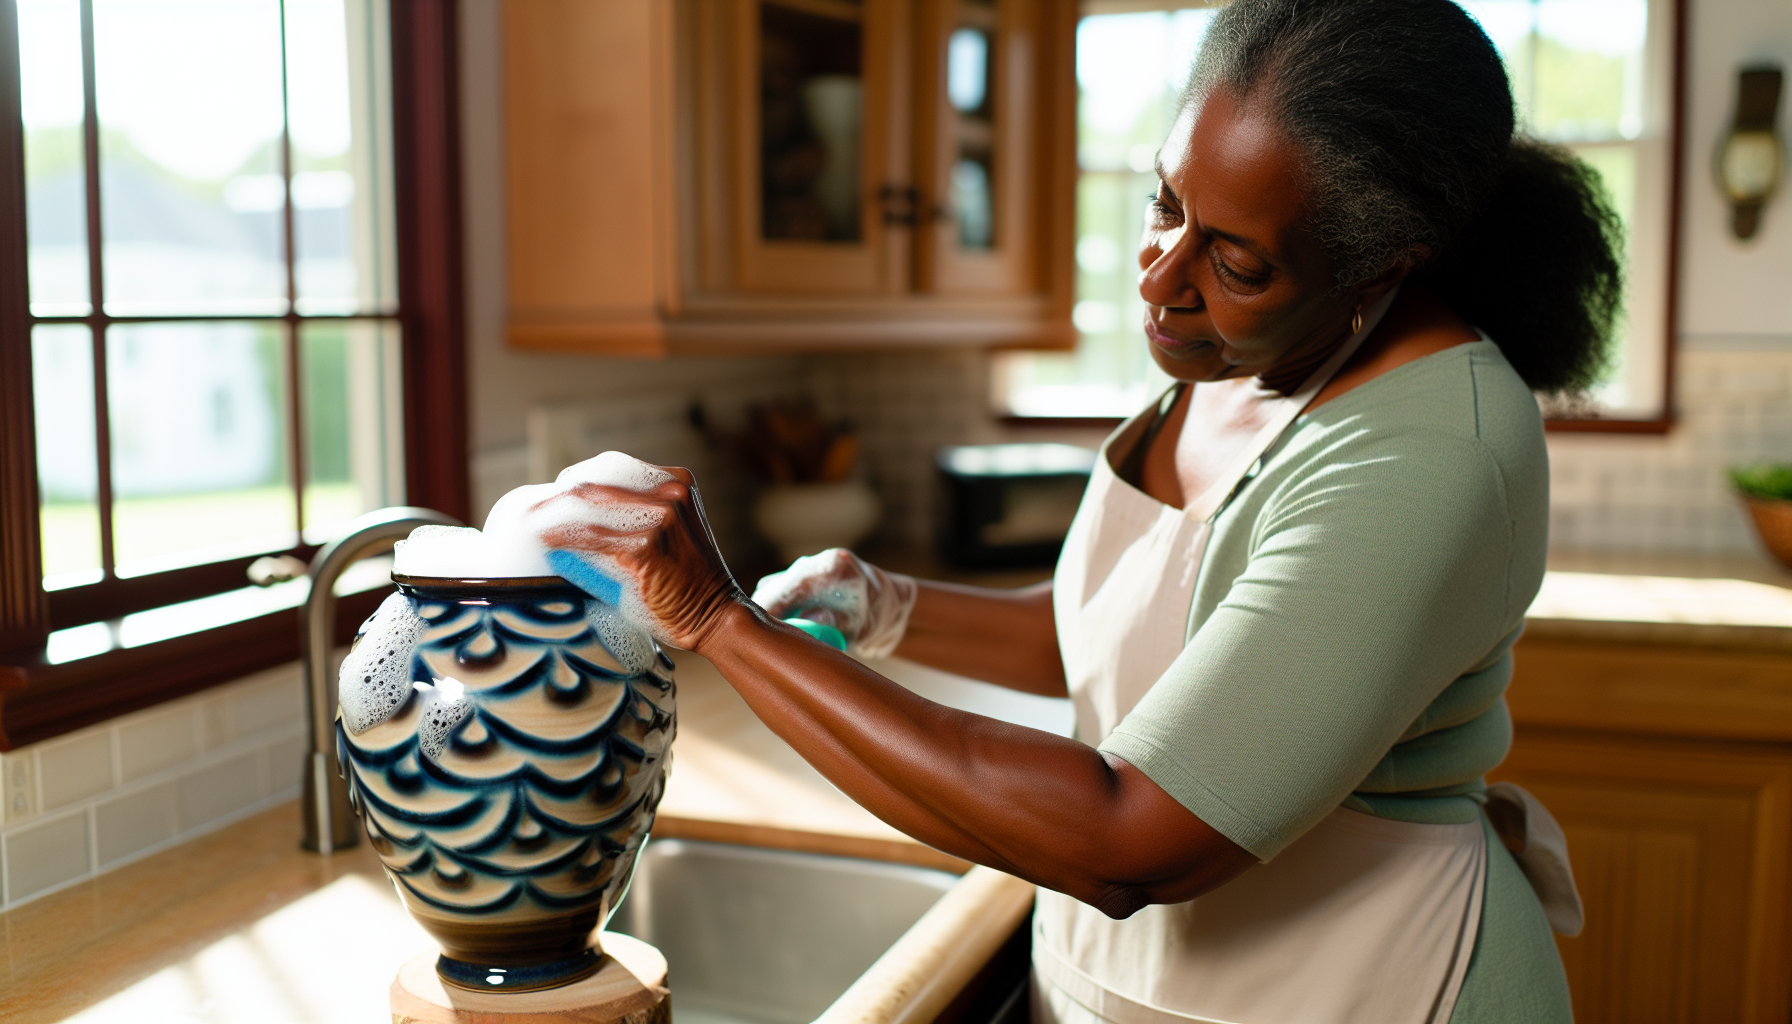 Cleaning a ceramic vase with warm soapy water